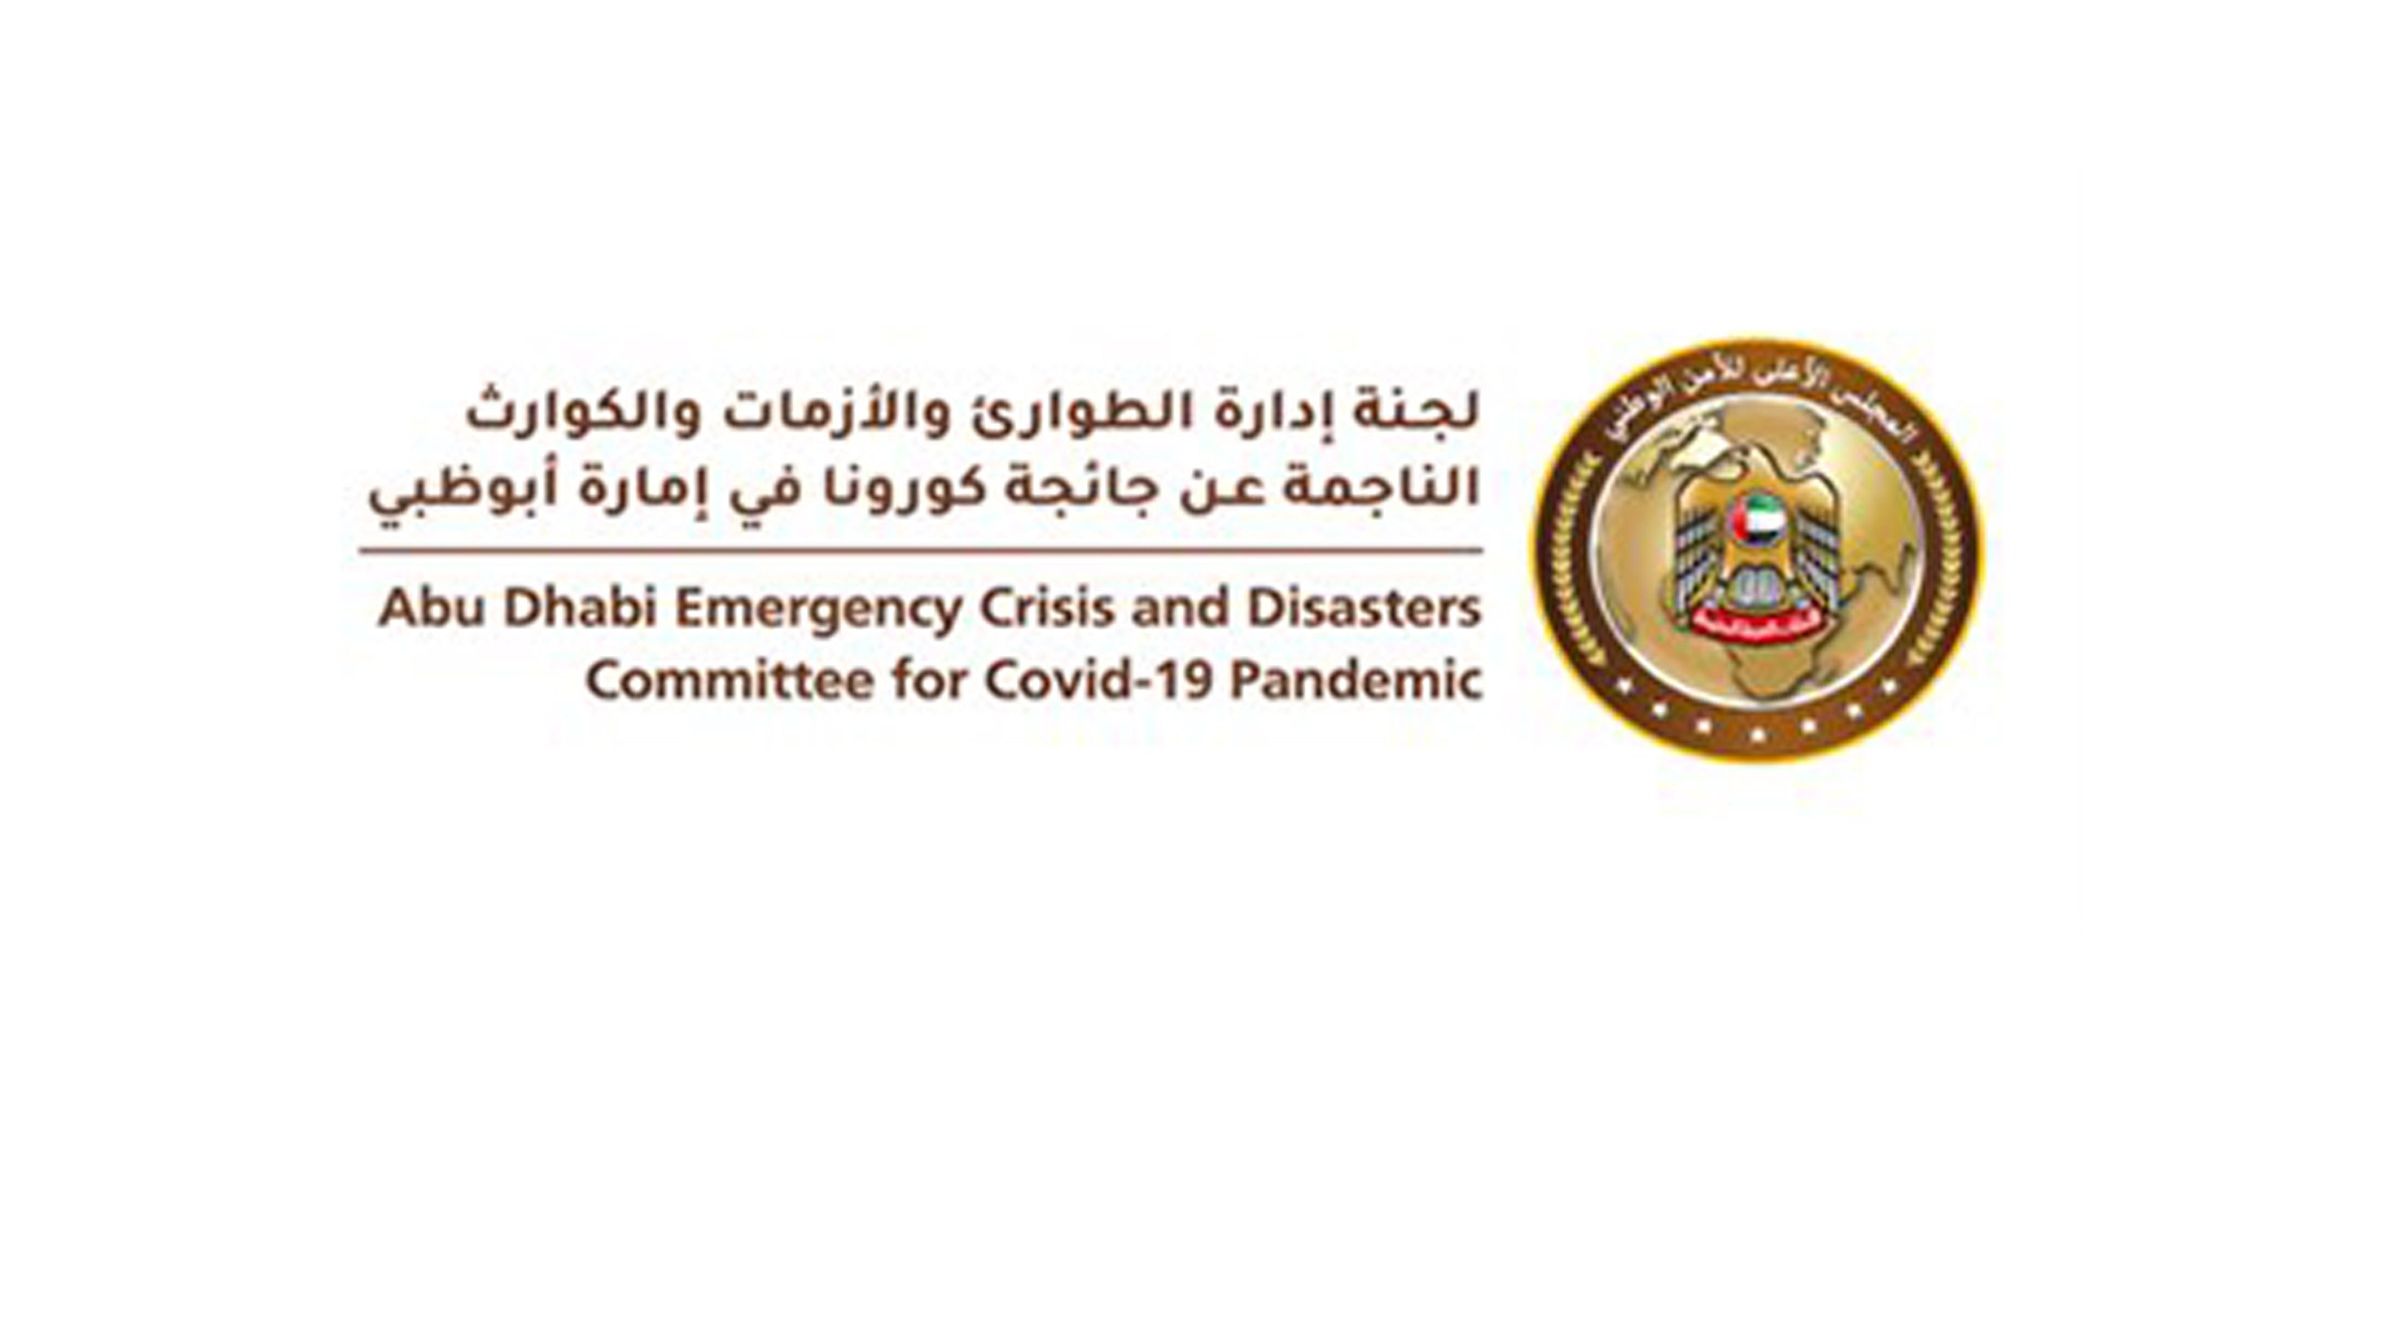 Abu Dhabi Crisis, Emergencies and Disasters Committee revises implemented measures in the emirate